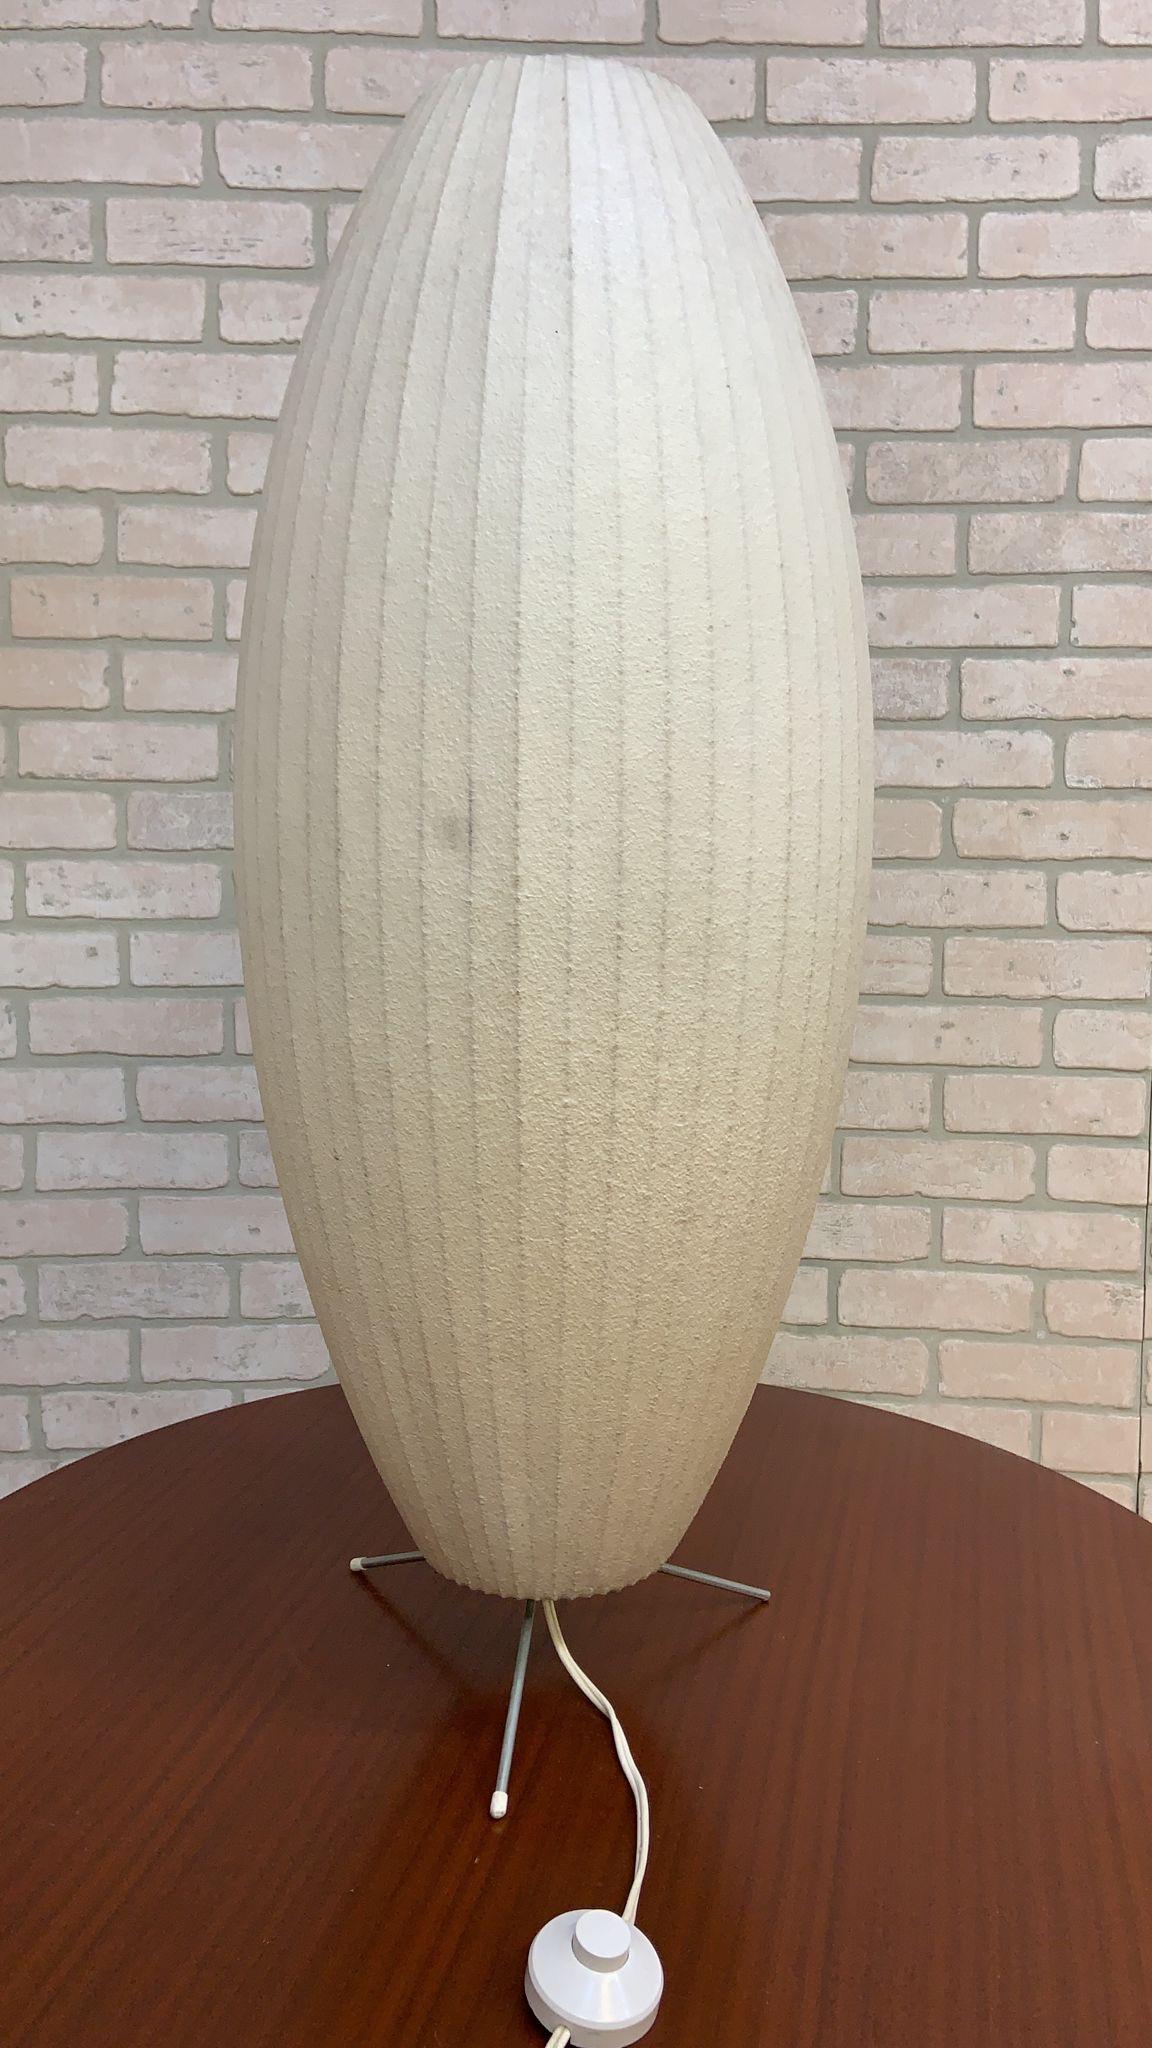 American Vintage Mid Century Modern George Nelson Floor Bubble Lamp For Sale